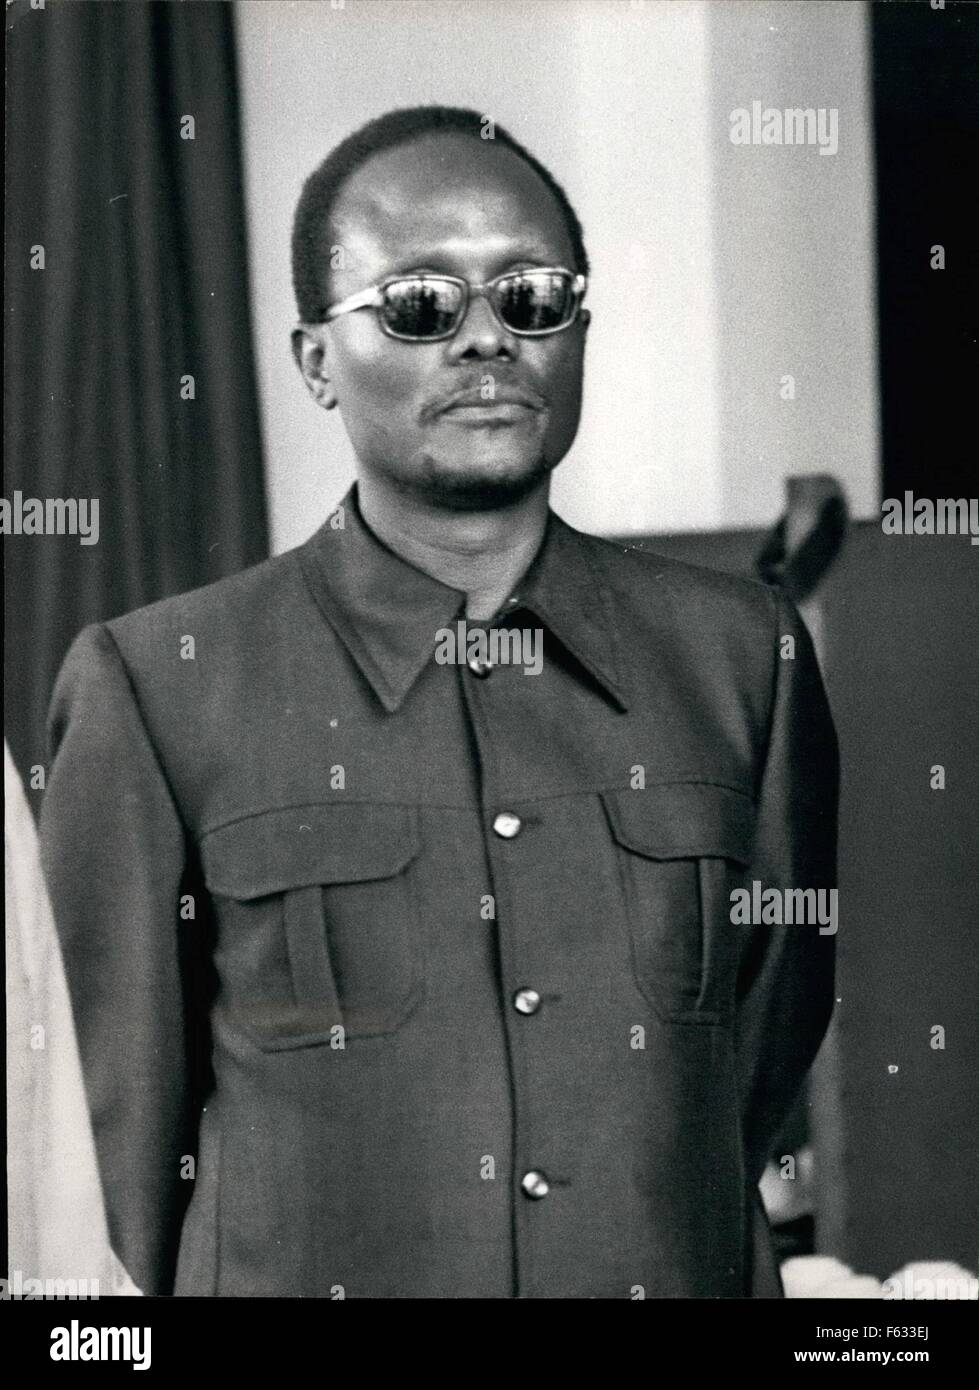 1962 - Dr. Holden Roberto, Leader of FNLA, Angolan Liberation Movement. Born 1925. Educated in the Congo. Worked in Finance Department, Belgian Congo, 1950-1954. Founded UPA Party, 1954. Leader of FNLA, 1962. Credits: Camerapix © Keystone Pictures USA/ZUMAPRESS.com/Alamy Live News Stock Photo